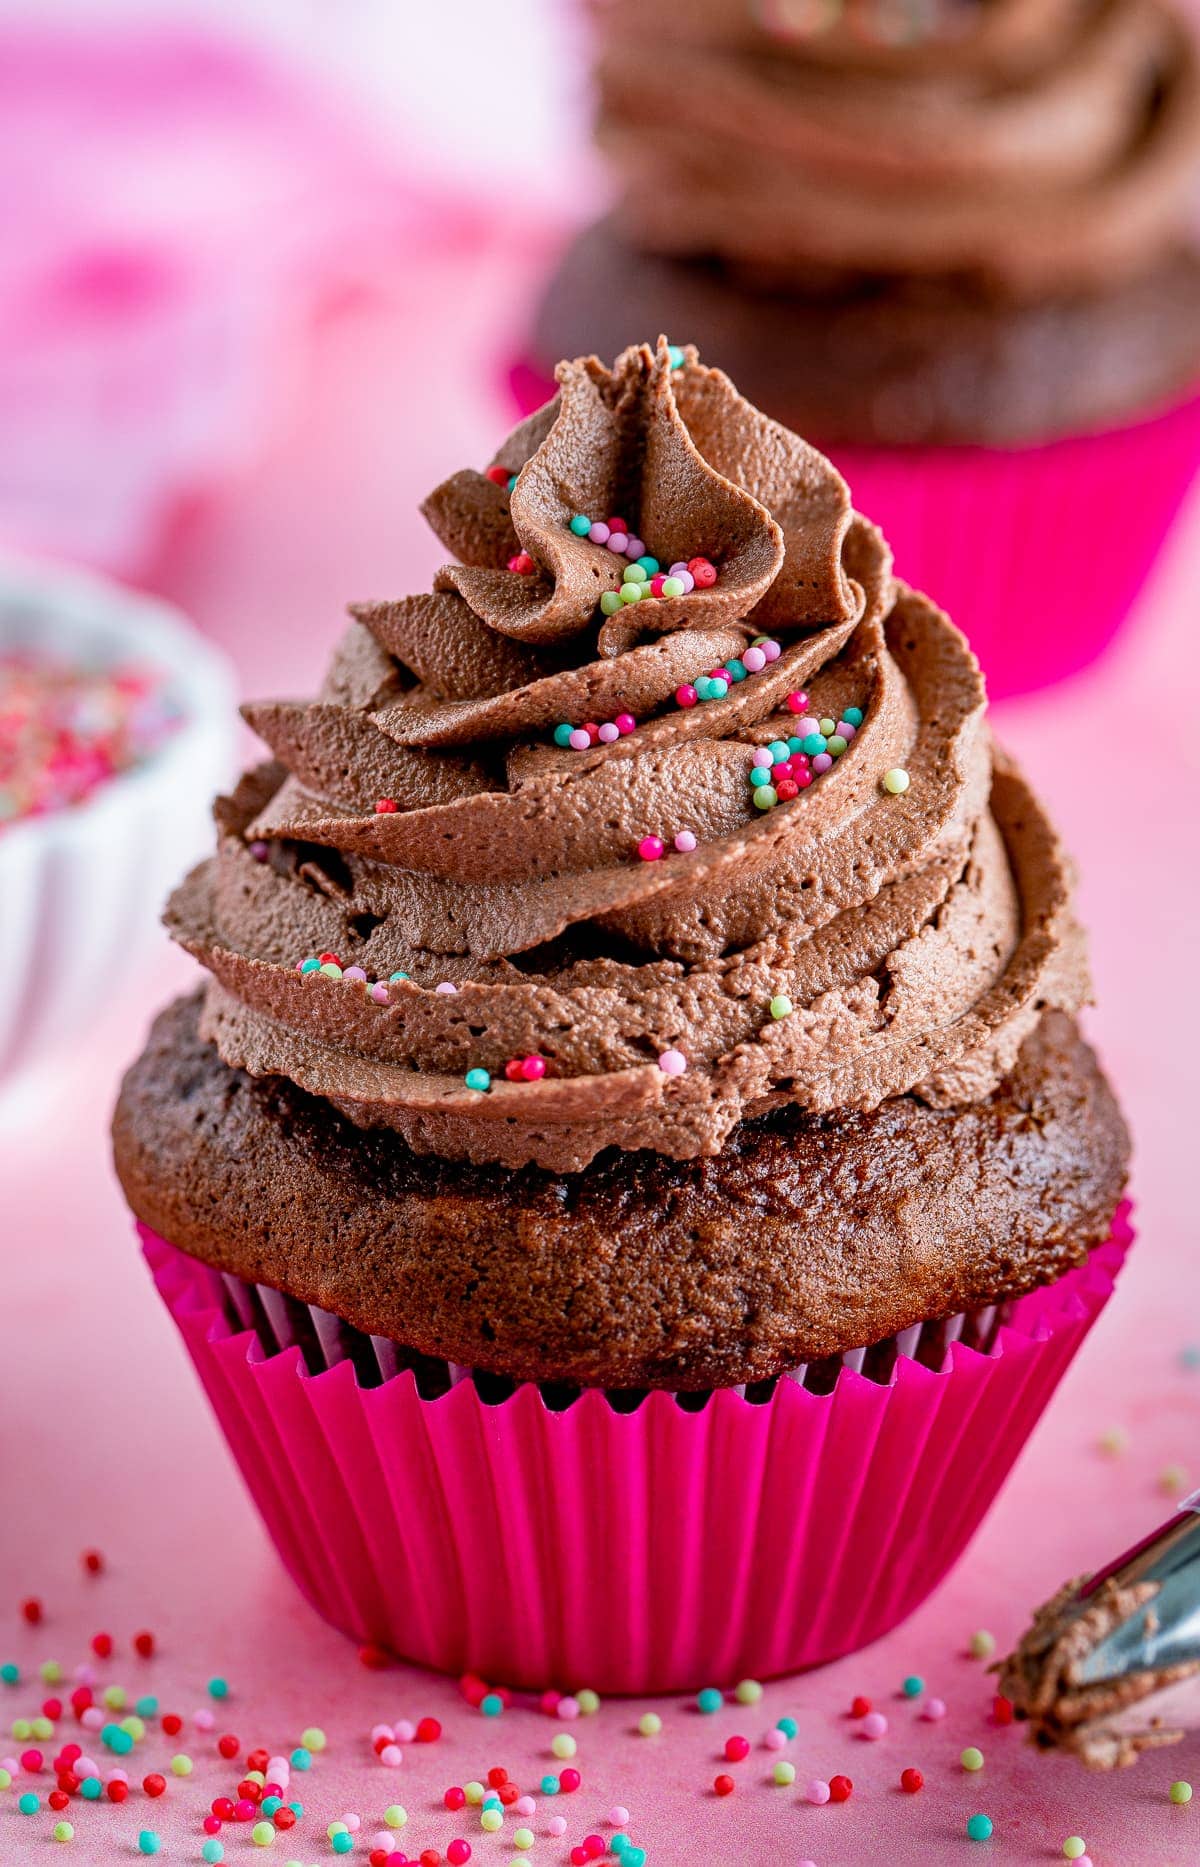 Chocolate Cupcake topped with Chocolate Buttercream Frosting with sprinkles.